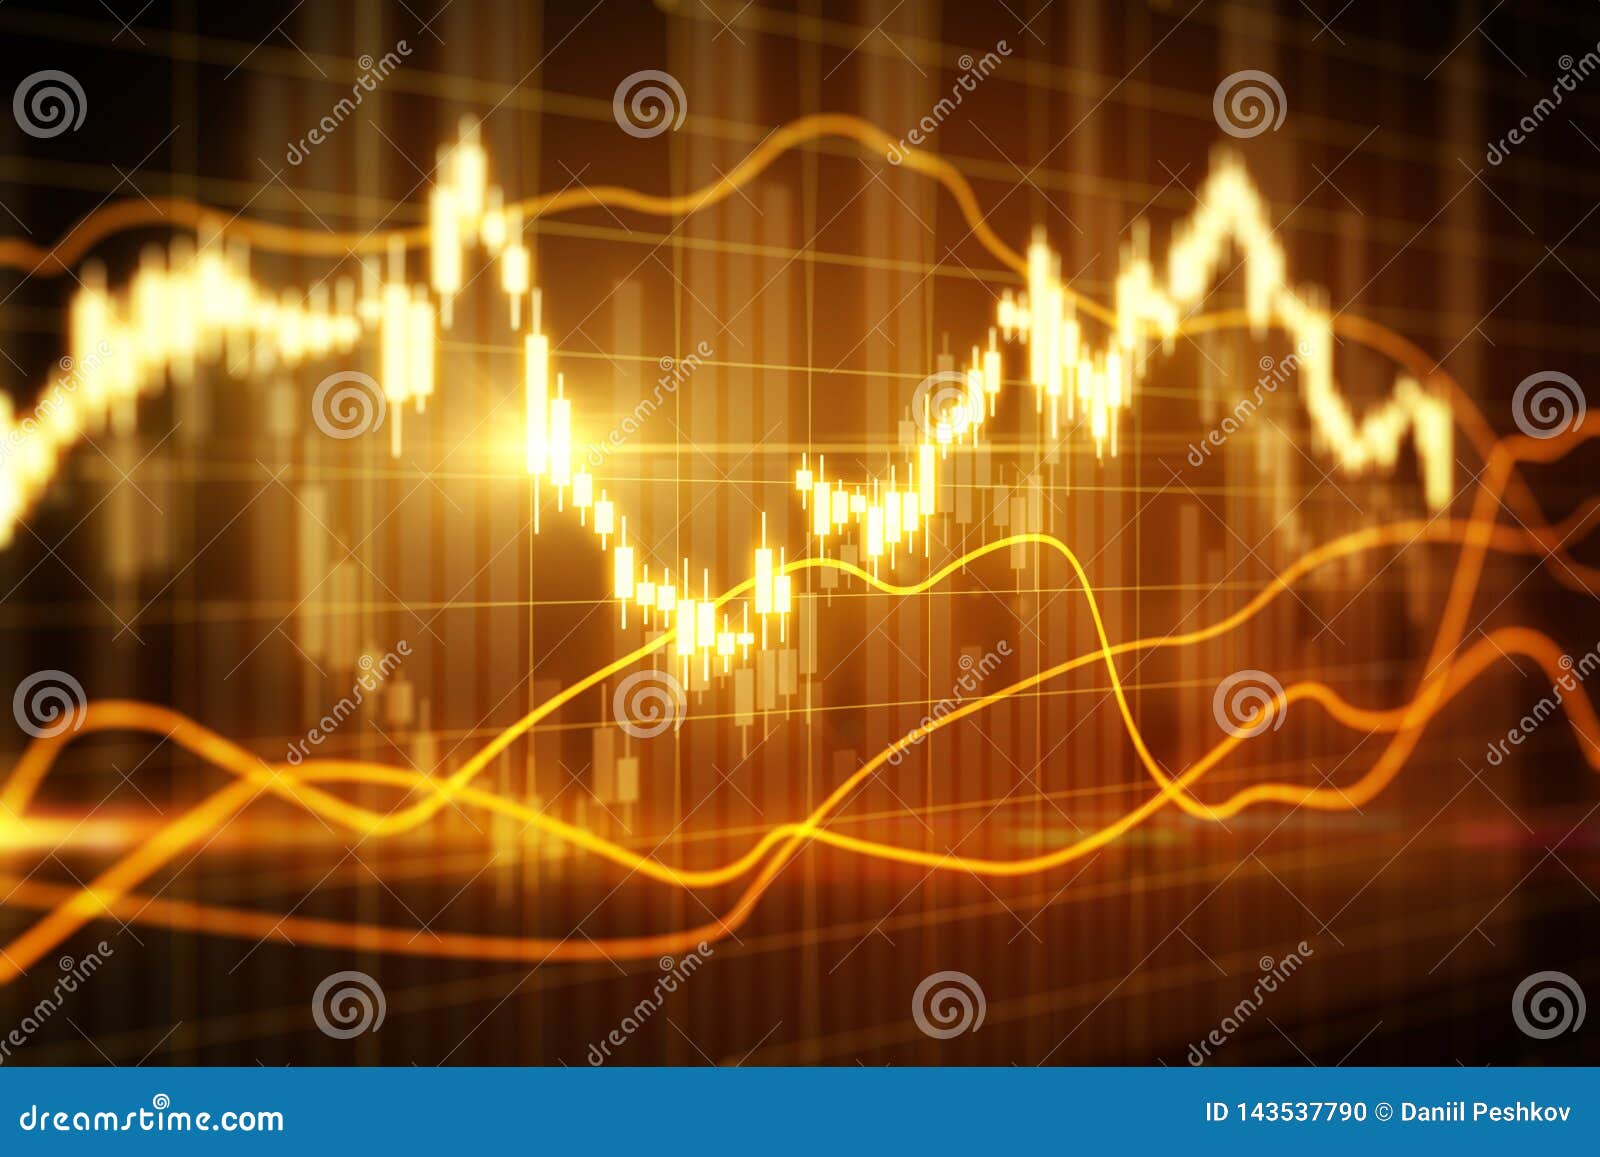 Premium Photo  Creative glowing candlestick forex chart on dark wallpaper  finance growth and trade concept 3d rendering